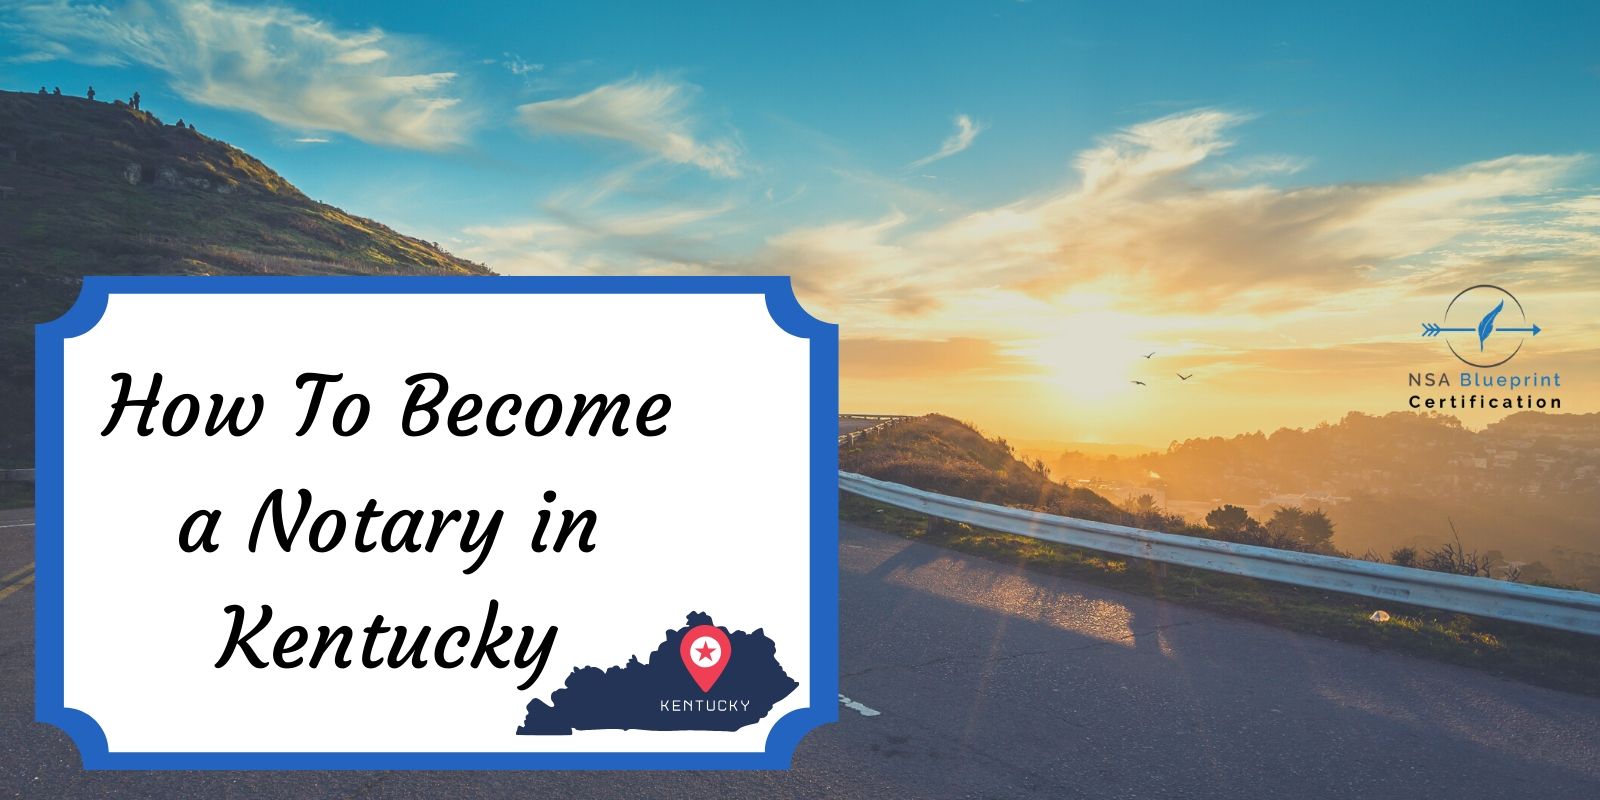 How to Become a Notary in KY | KY Notary Public | NSA Blueprint